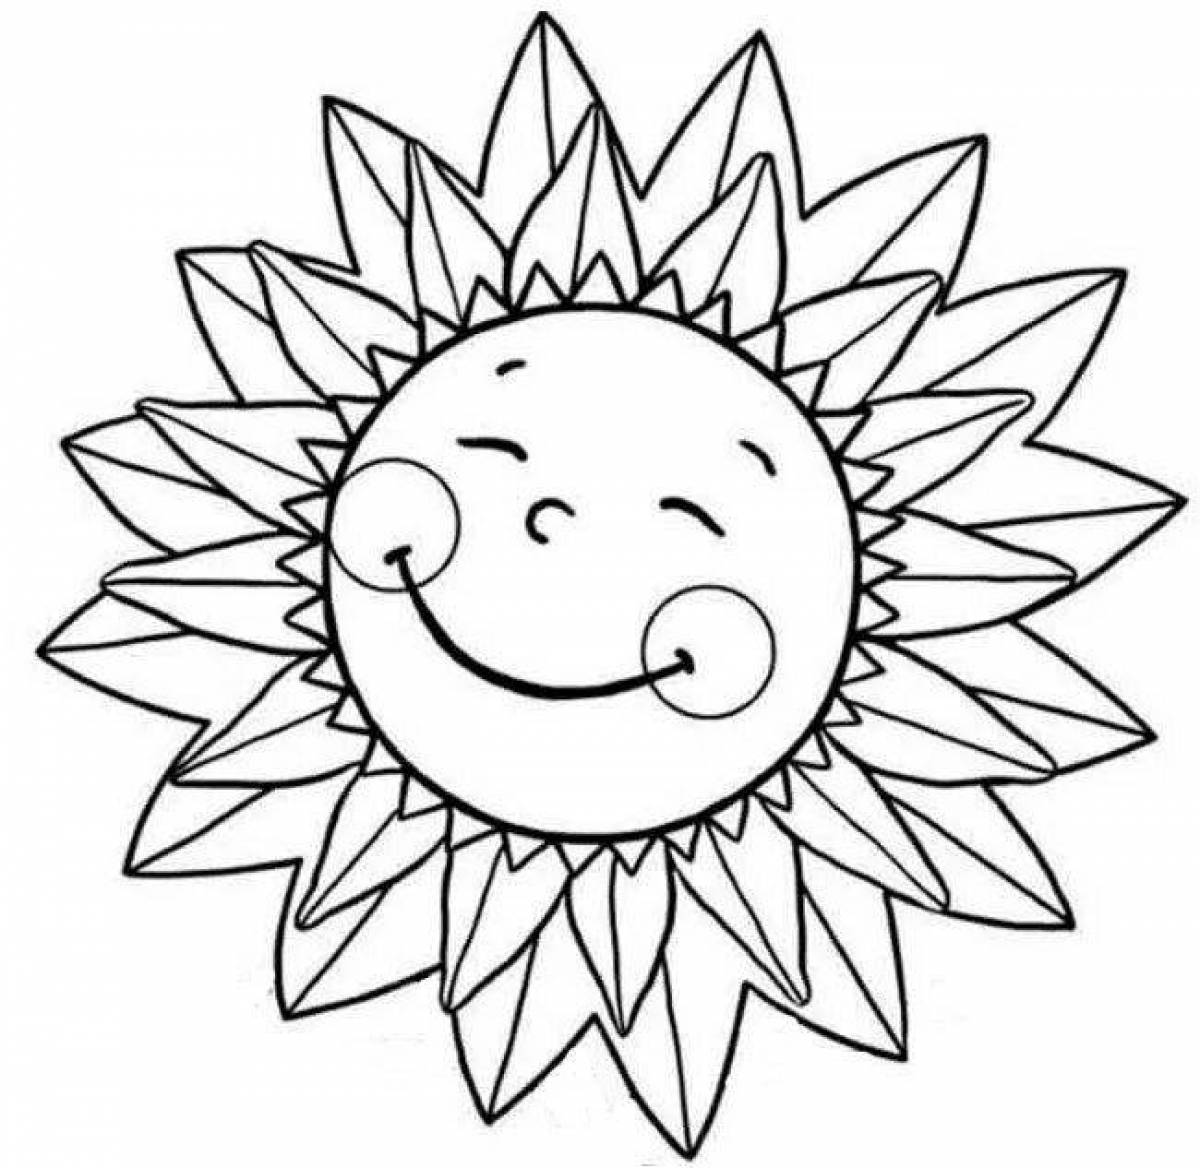 Shimmering sun coloring picture